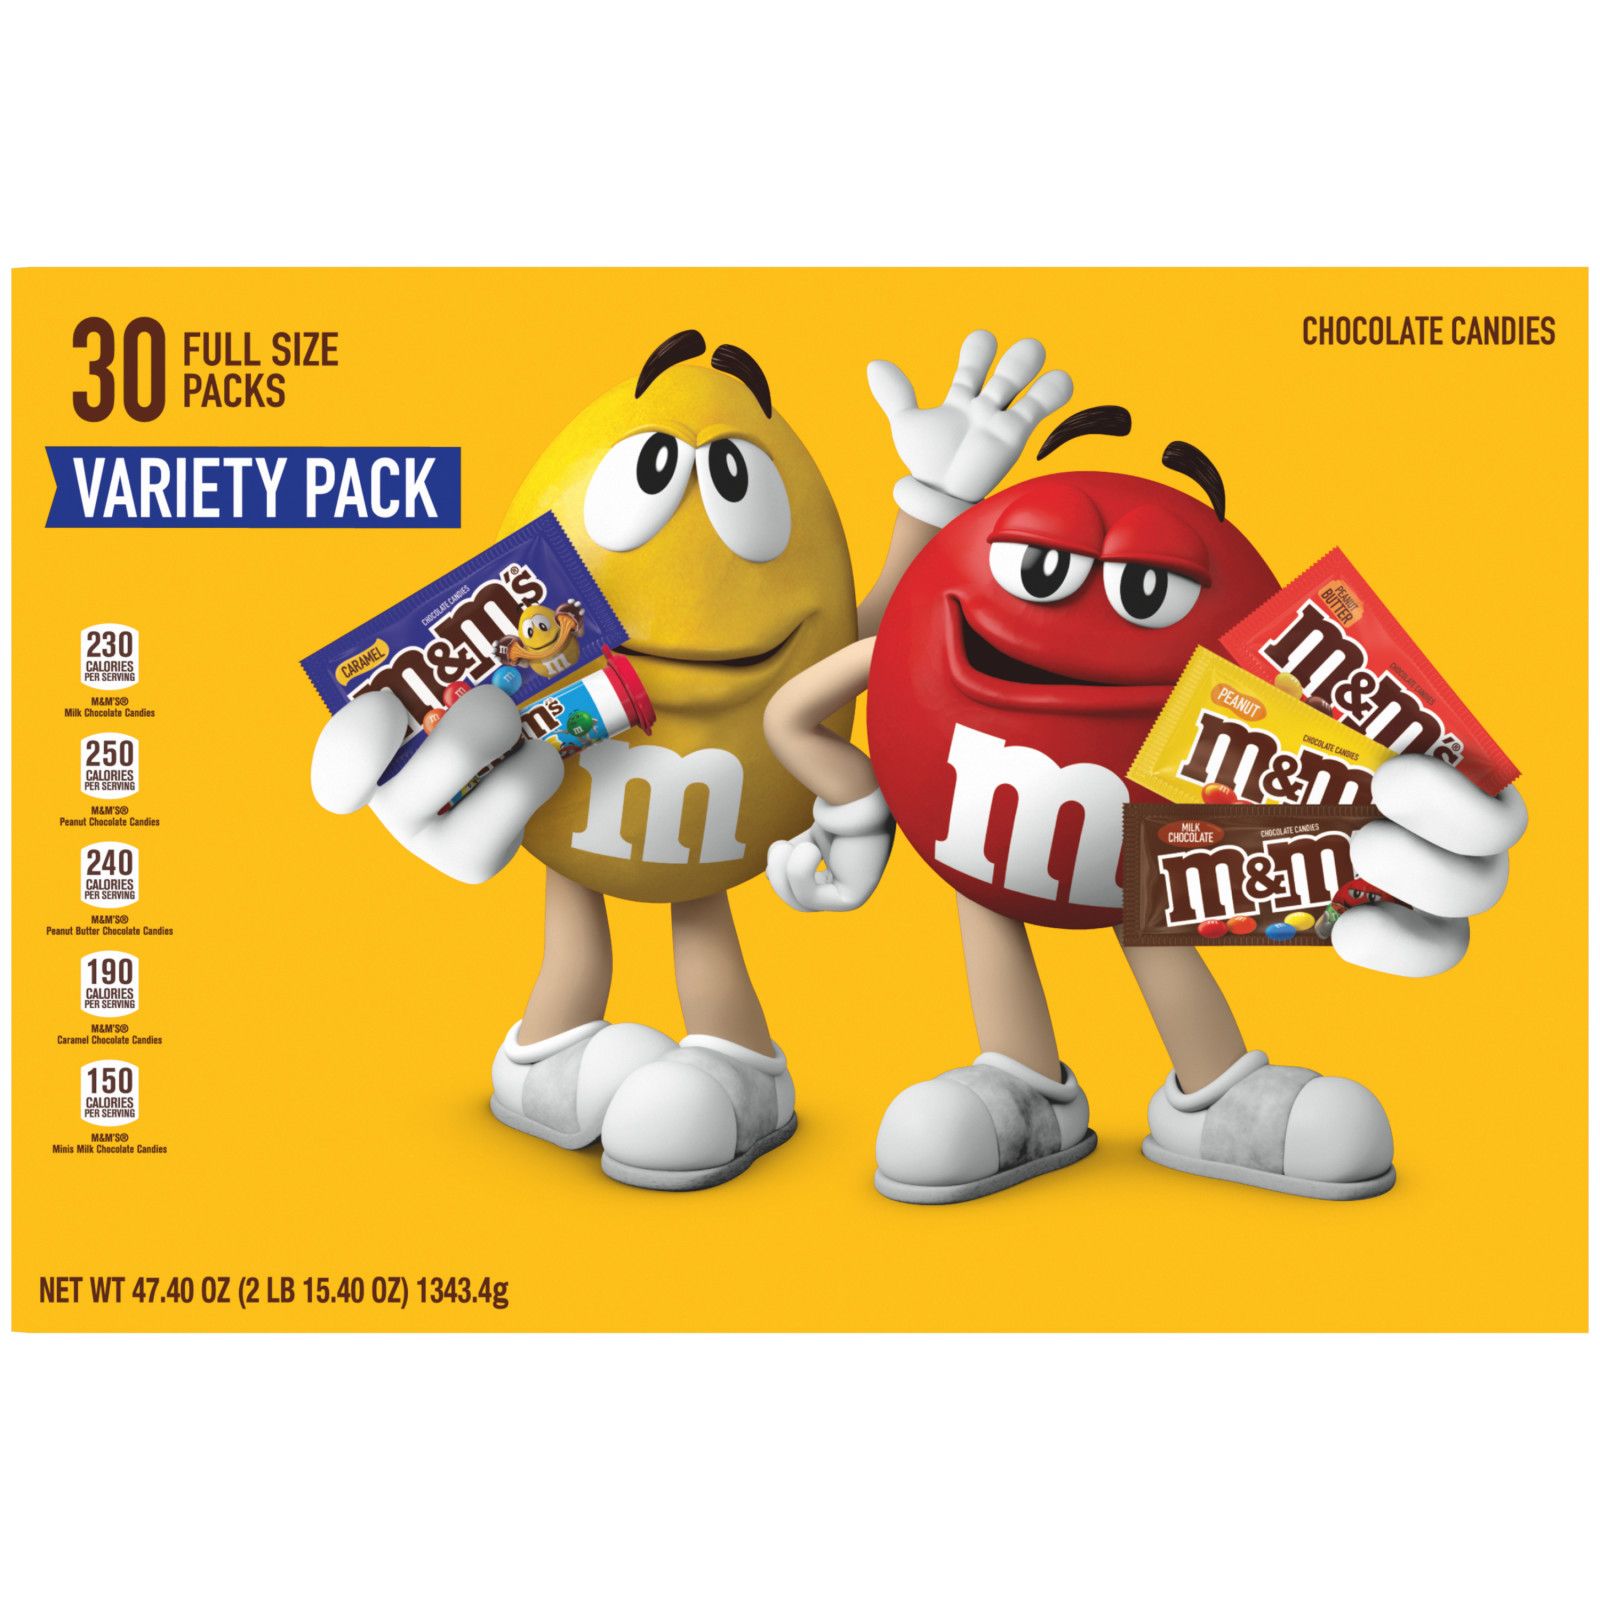  M&M'S Milk Chocolate Candy, Super Bowl Chocolates Party Size, 38  oz Bag : M&M'S: Grocery & Gourmet Food